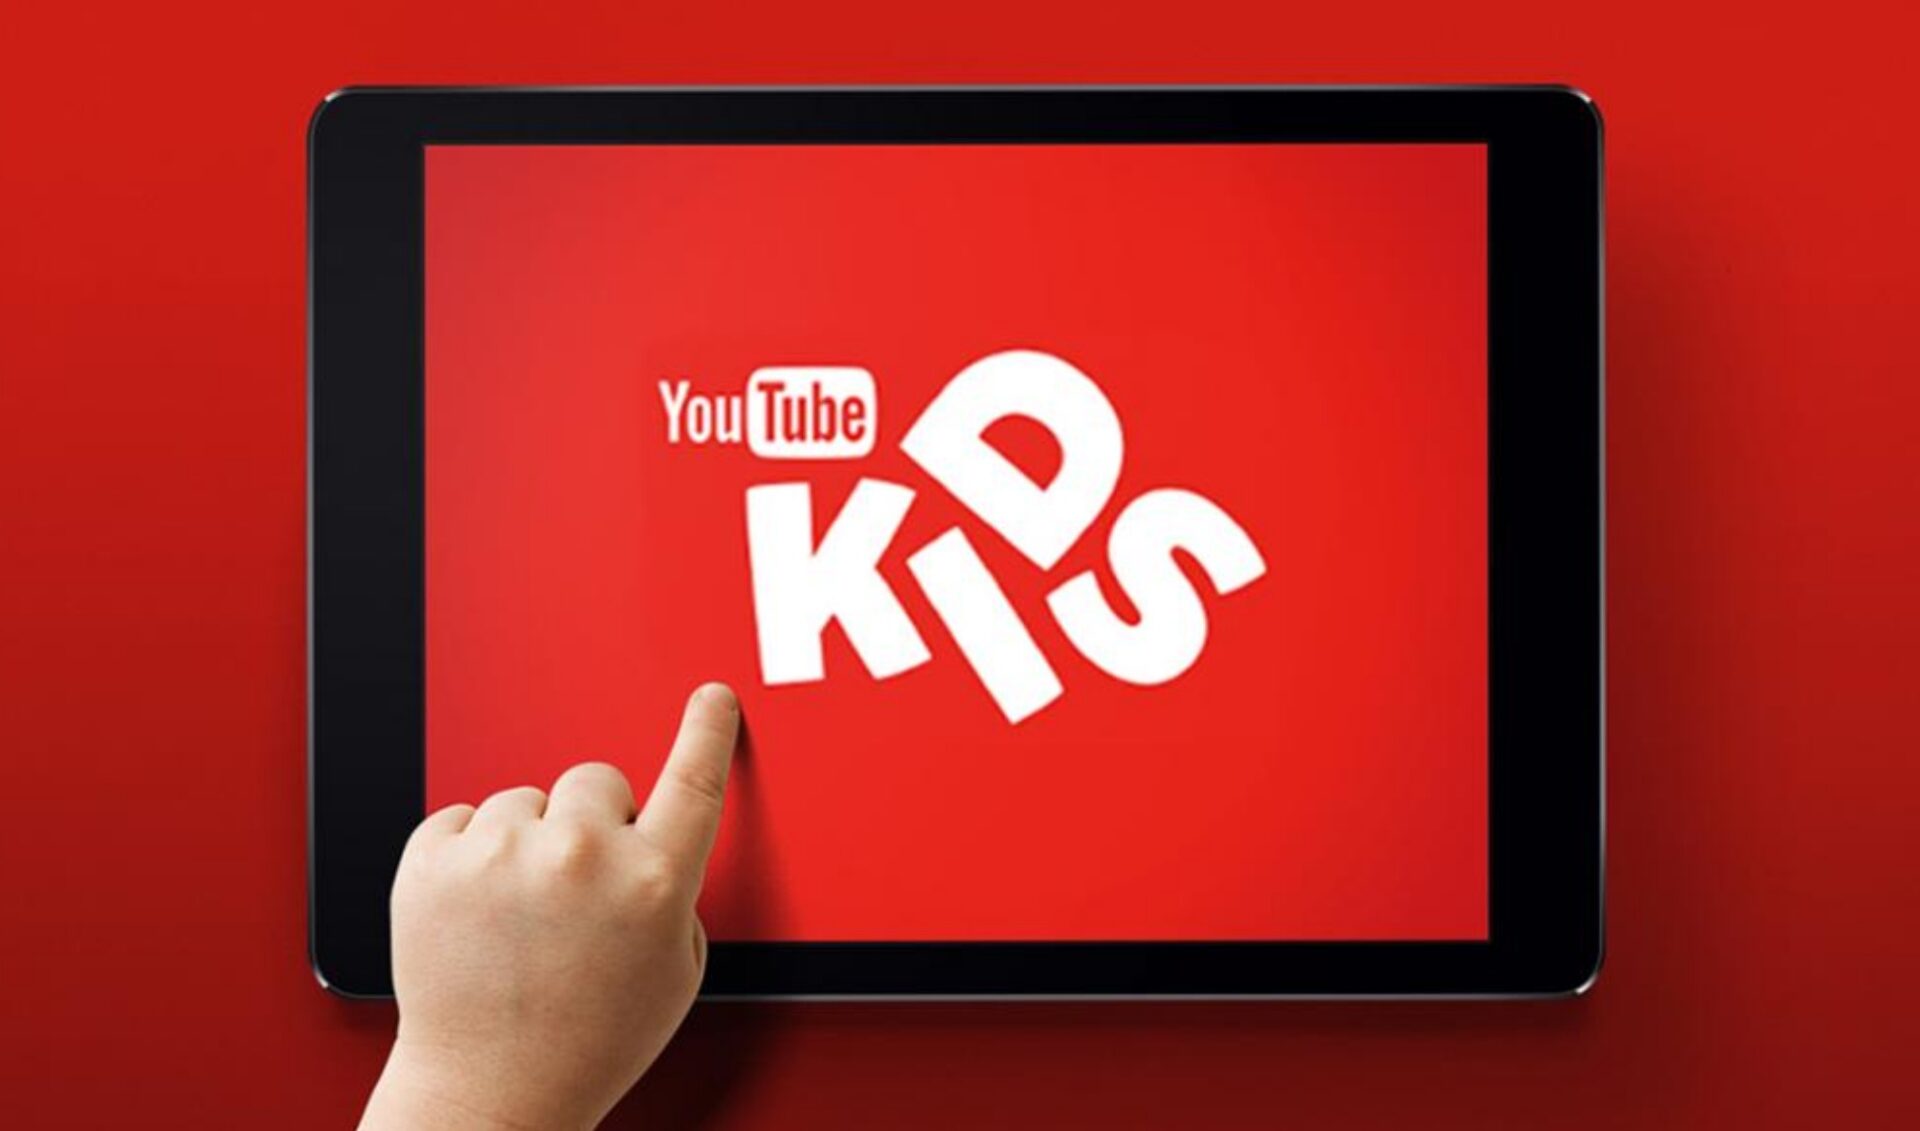 YouTube’s new parental controls will let kids read comments that were previously turned off